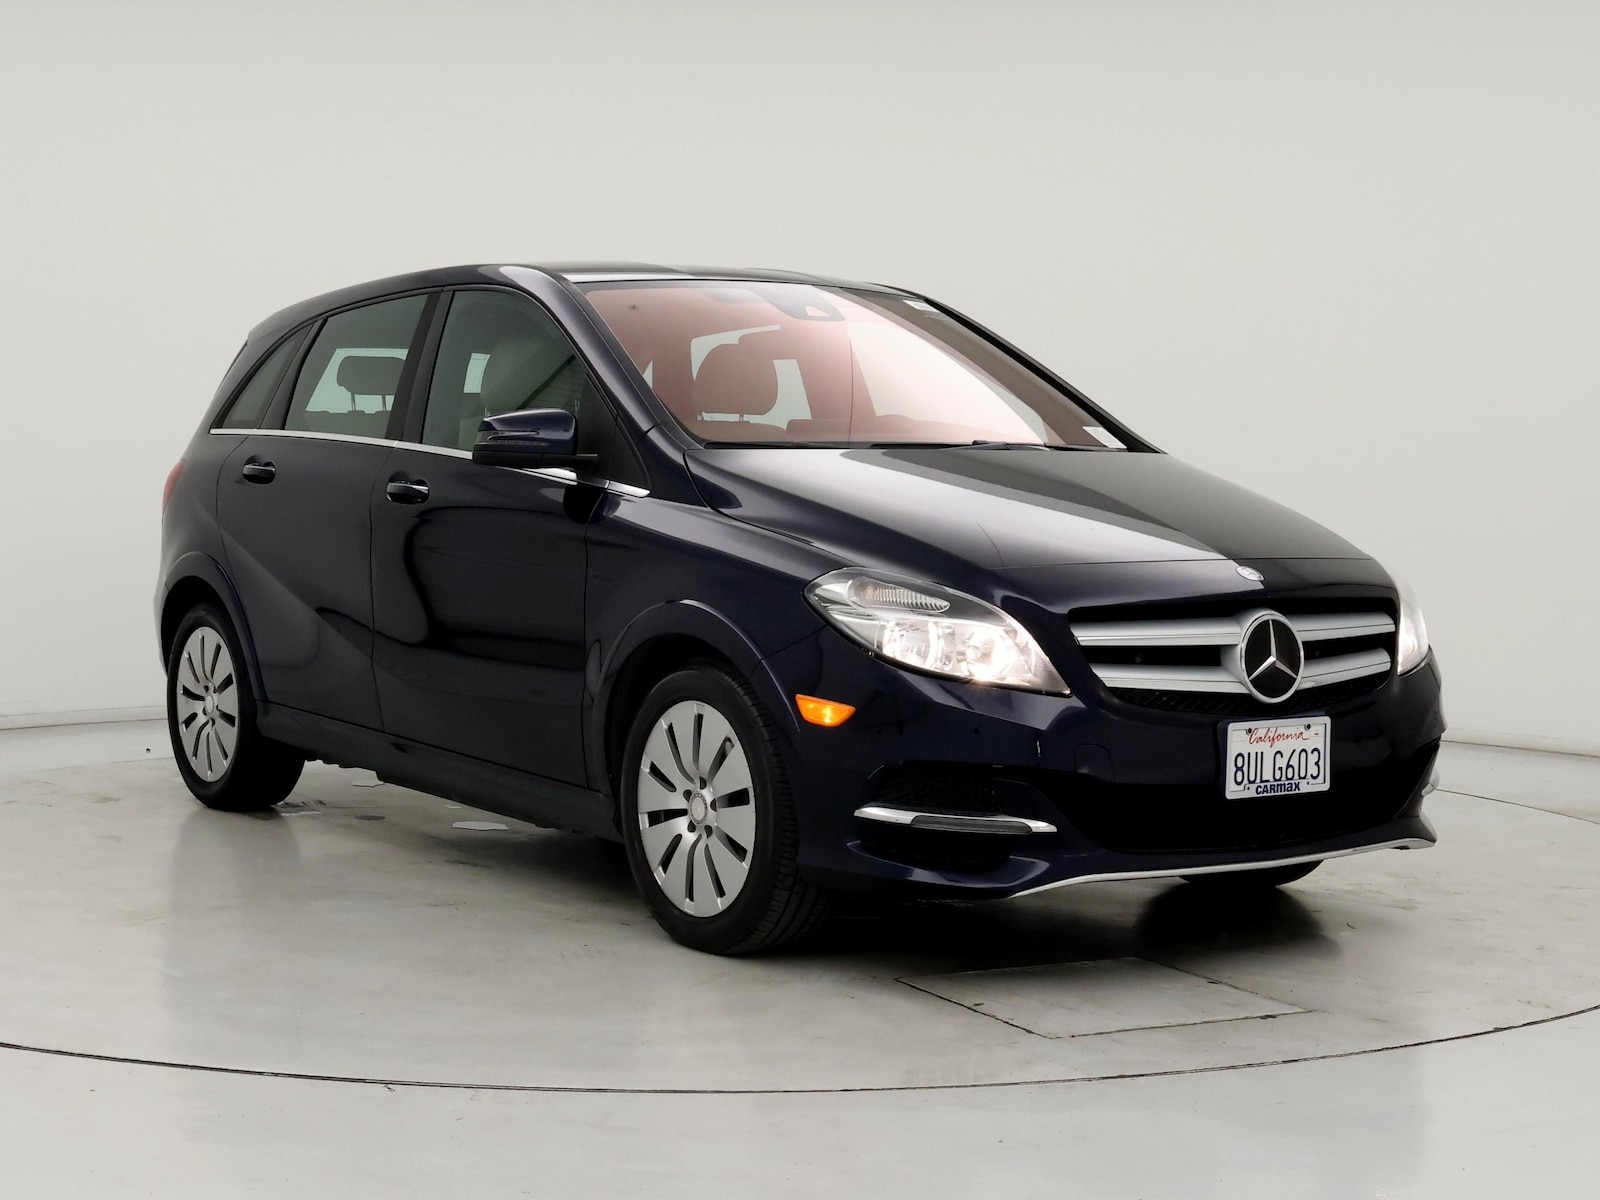 Used 2017 Mercedes-Benz B-Class B250e with VIN WDDVP9ABXHJ014036 for sale in Kenosha, WI